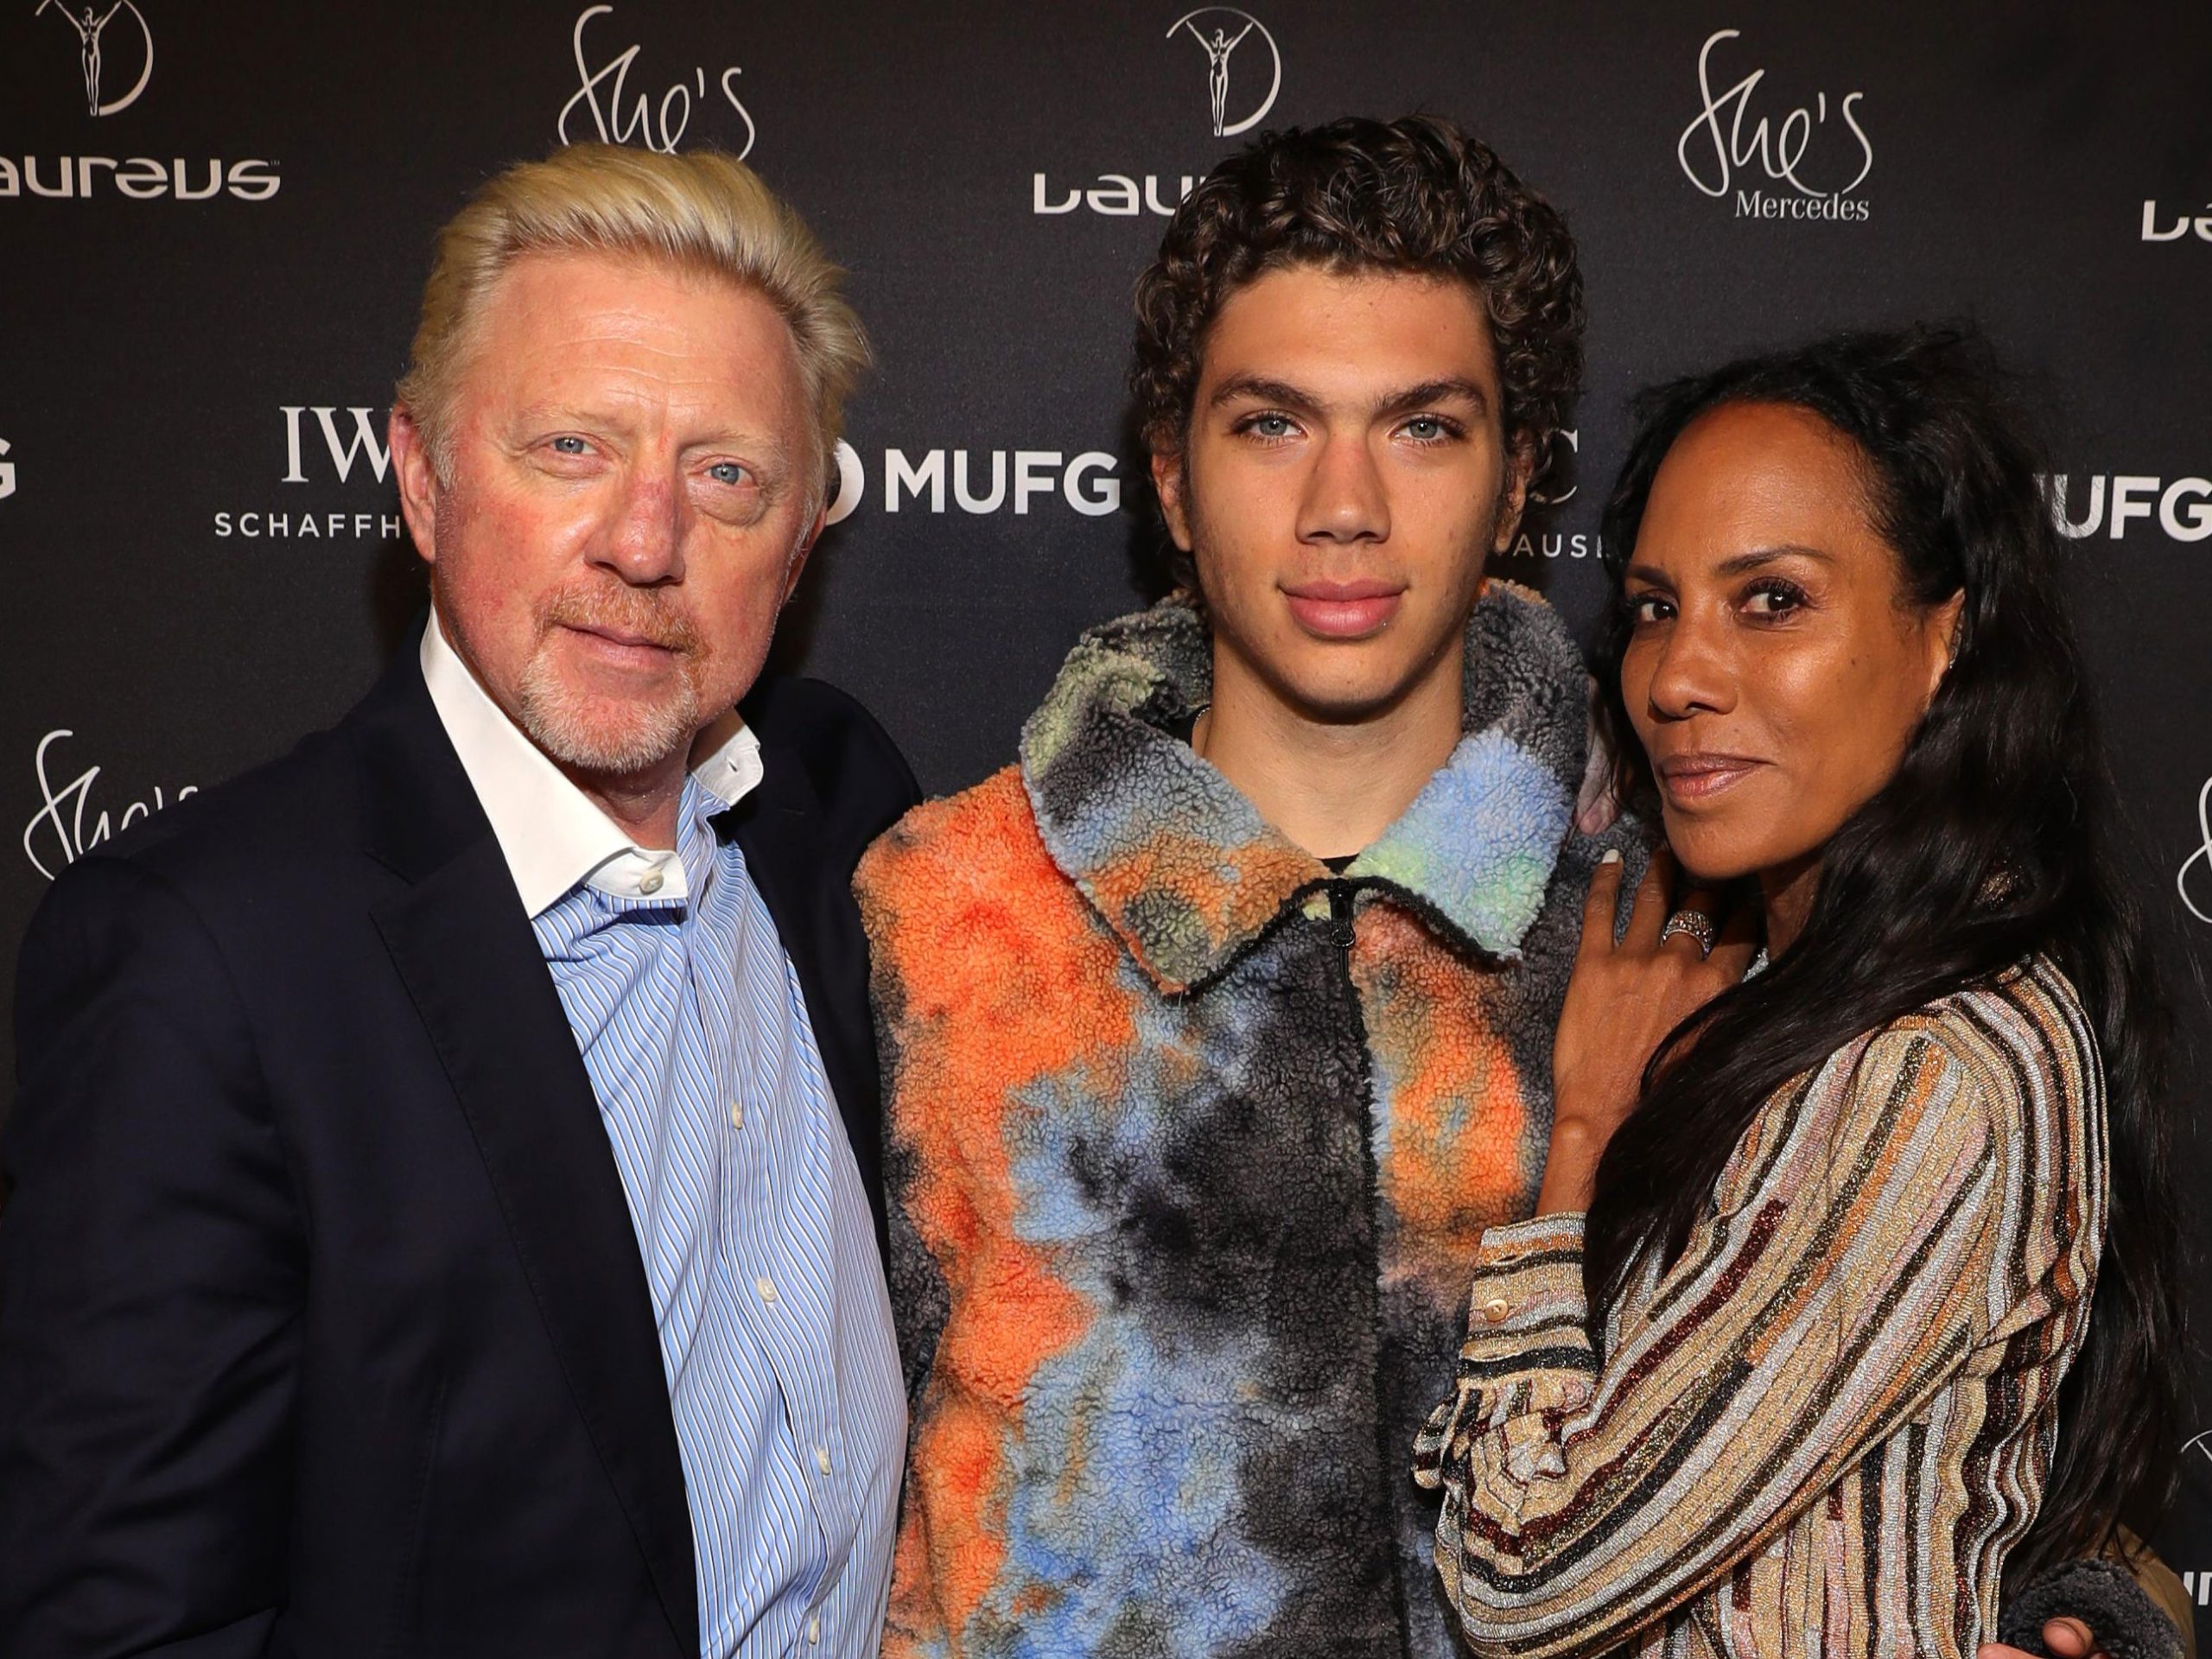 Boris Becker’s son has been opening up about his ‘obvious’ good looks and people can’t believe it’s not a parody interview